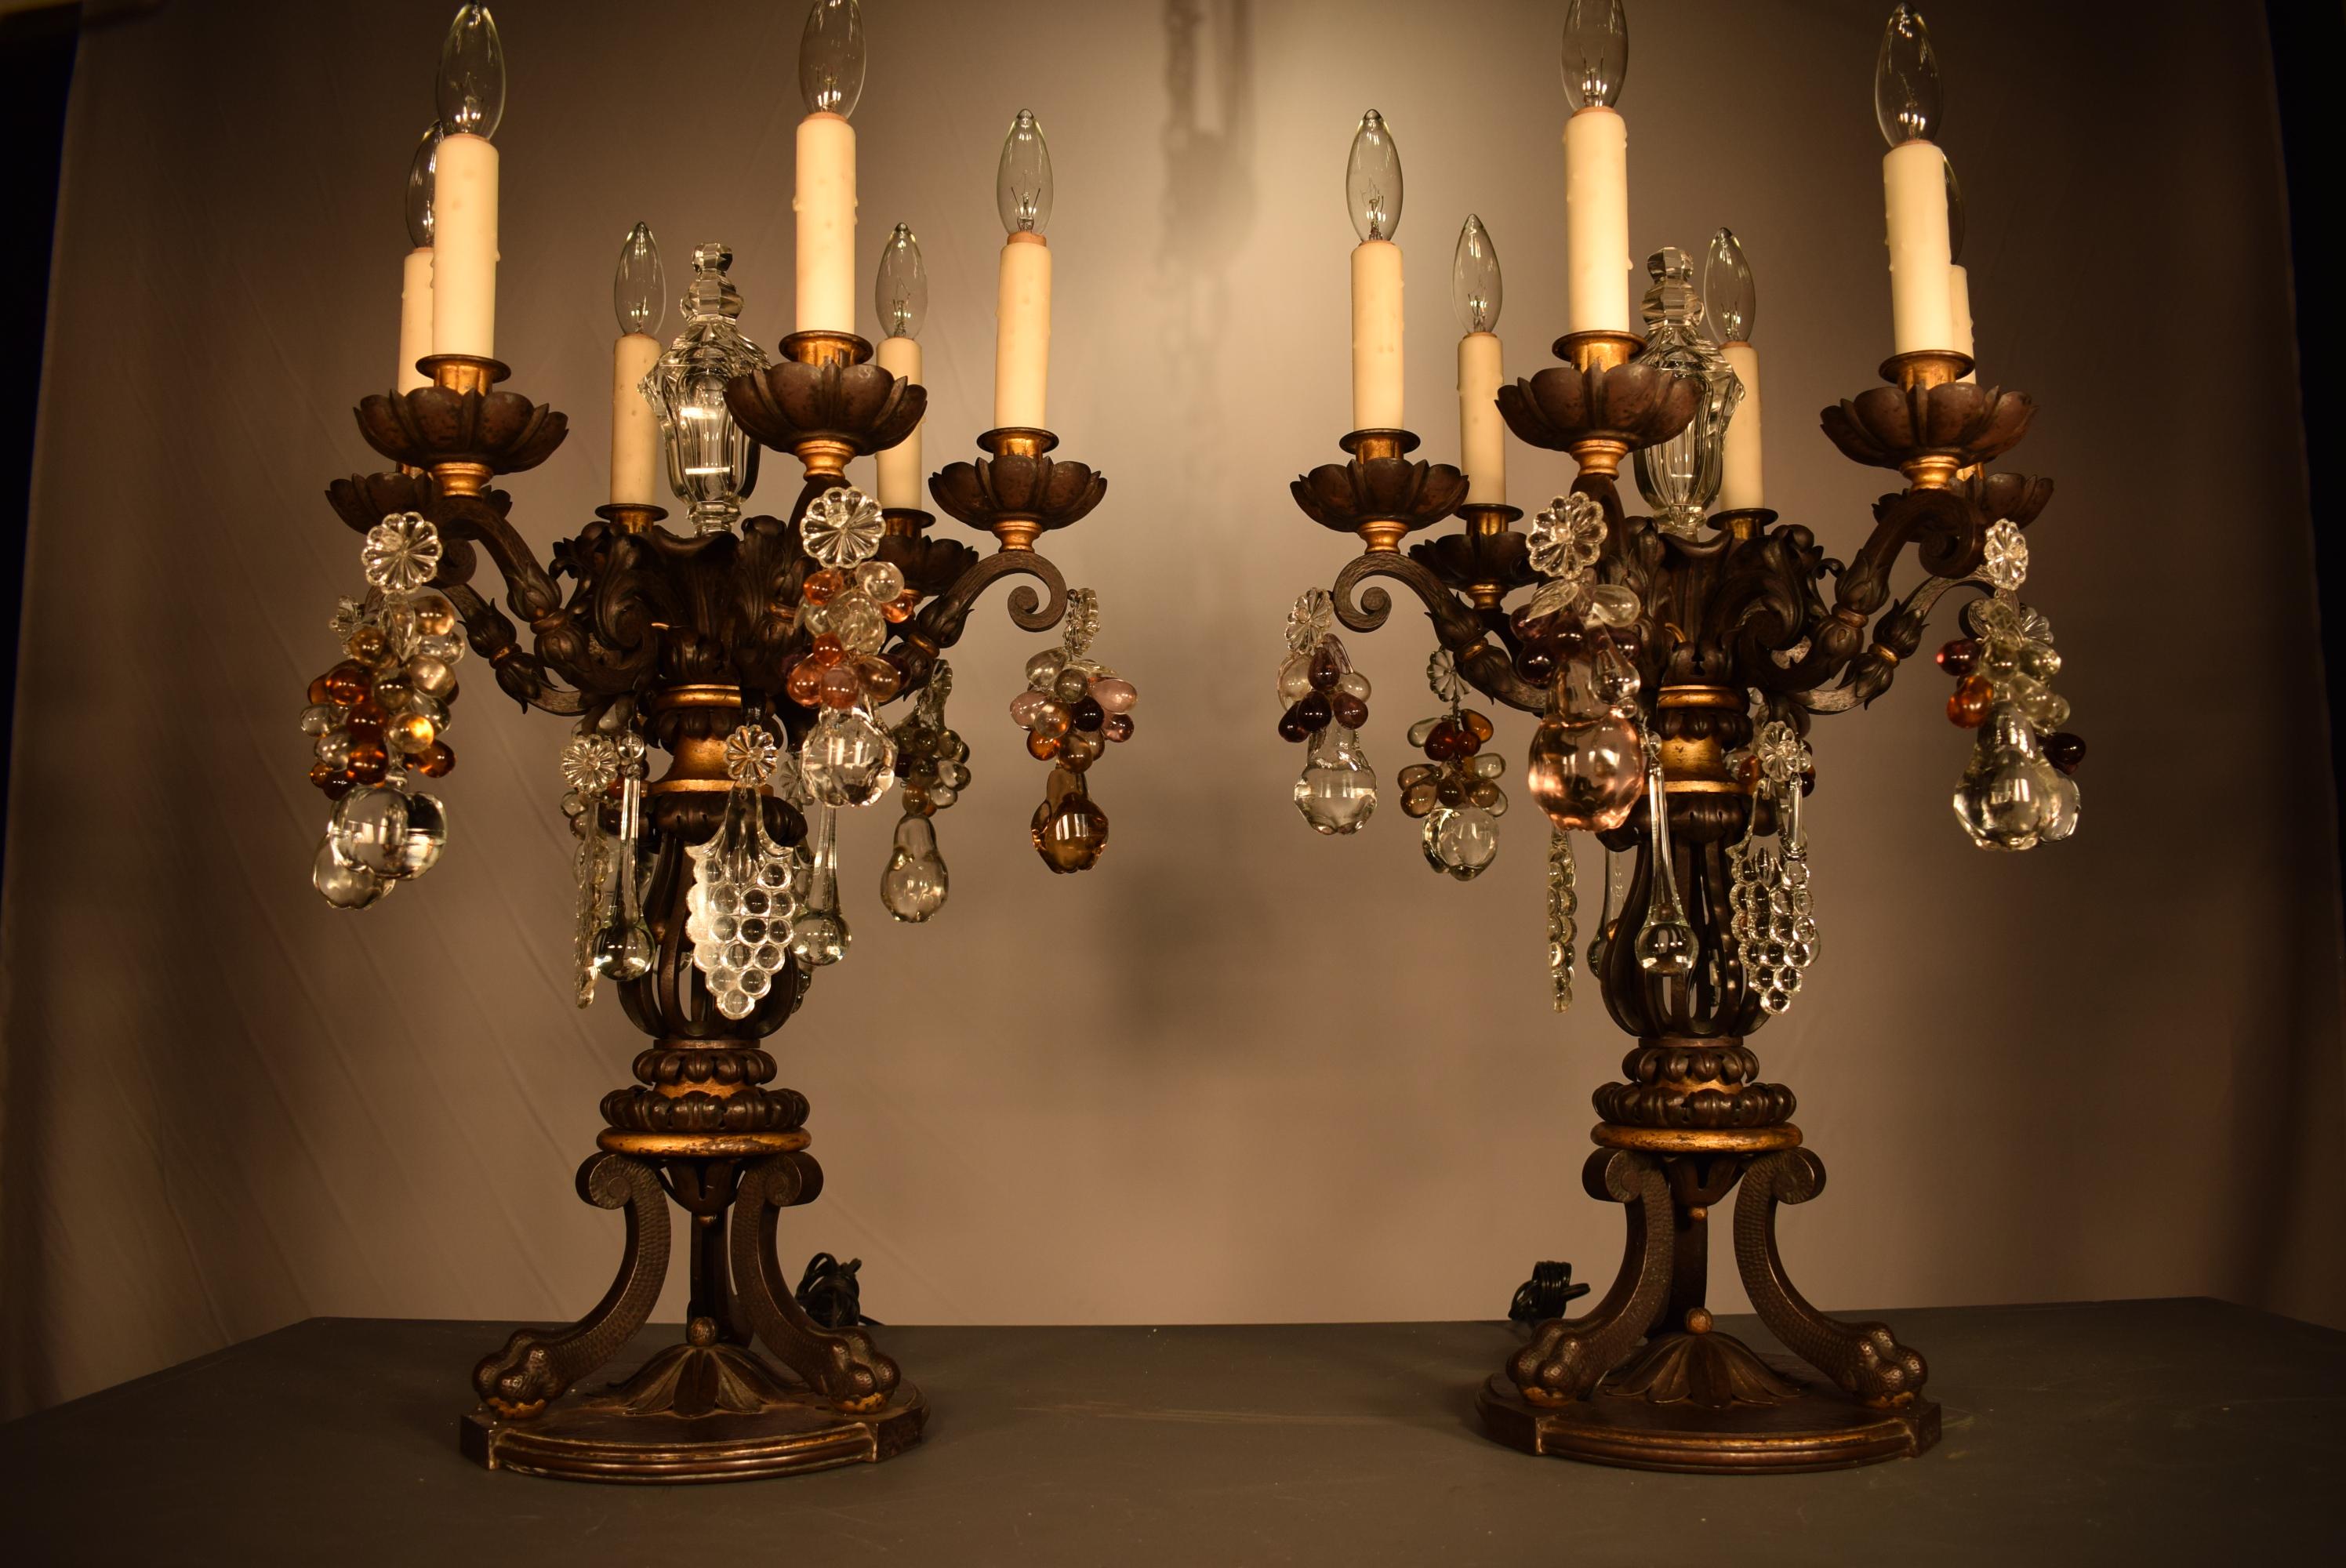 A phenomenal pair of iron girandoles, partially gilt, ornate with clusters of crystal fruits and featuring two handcut crystal pyramids. The acanthus leaves are wonderful examples of repousse technique. The rest of the body done with martele